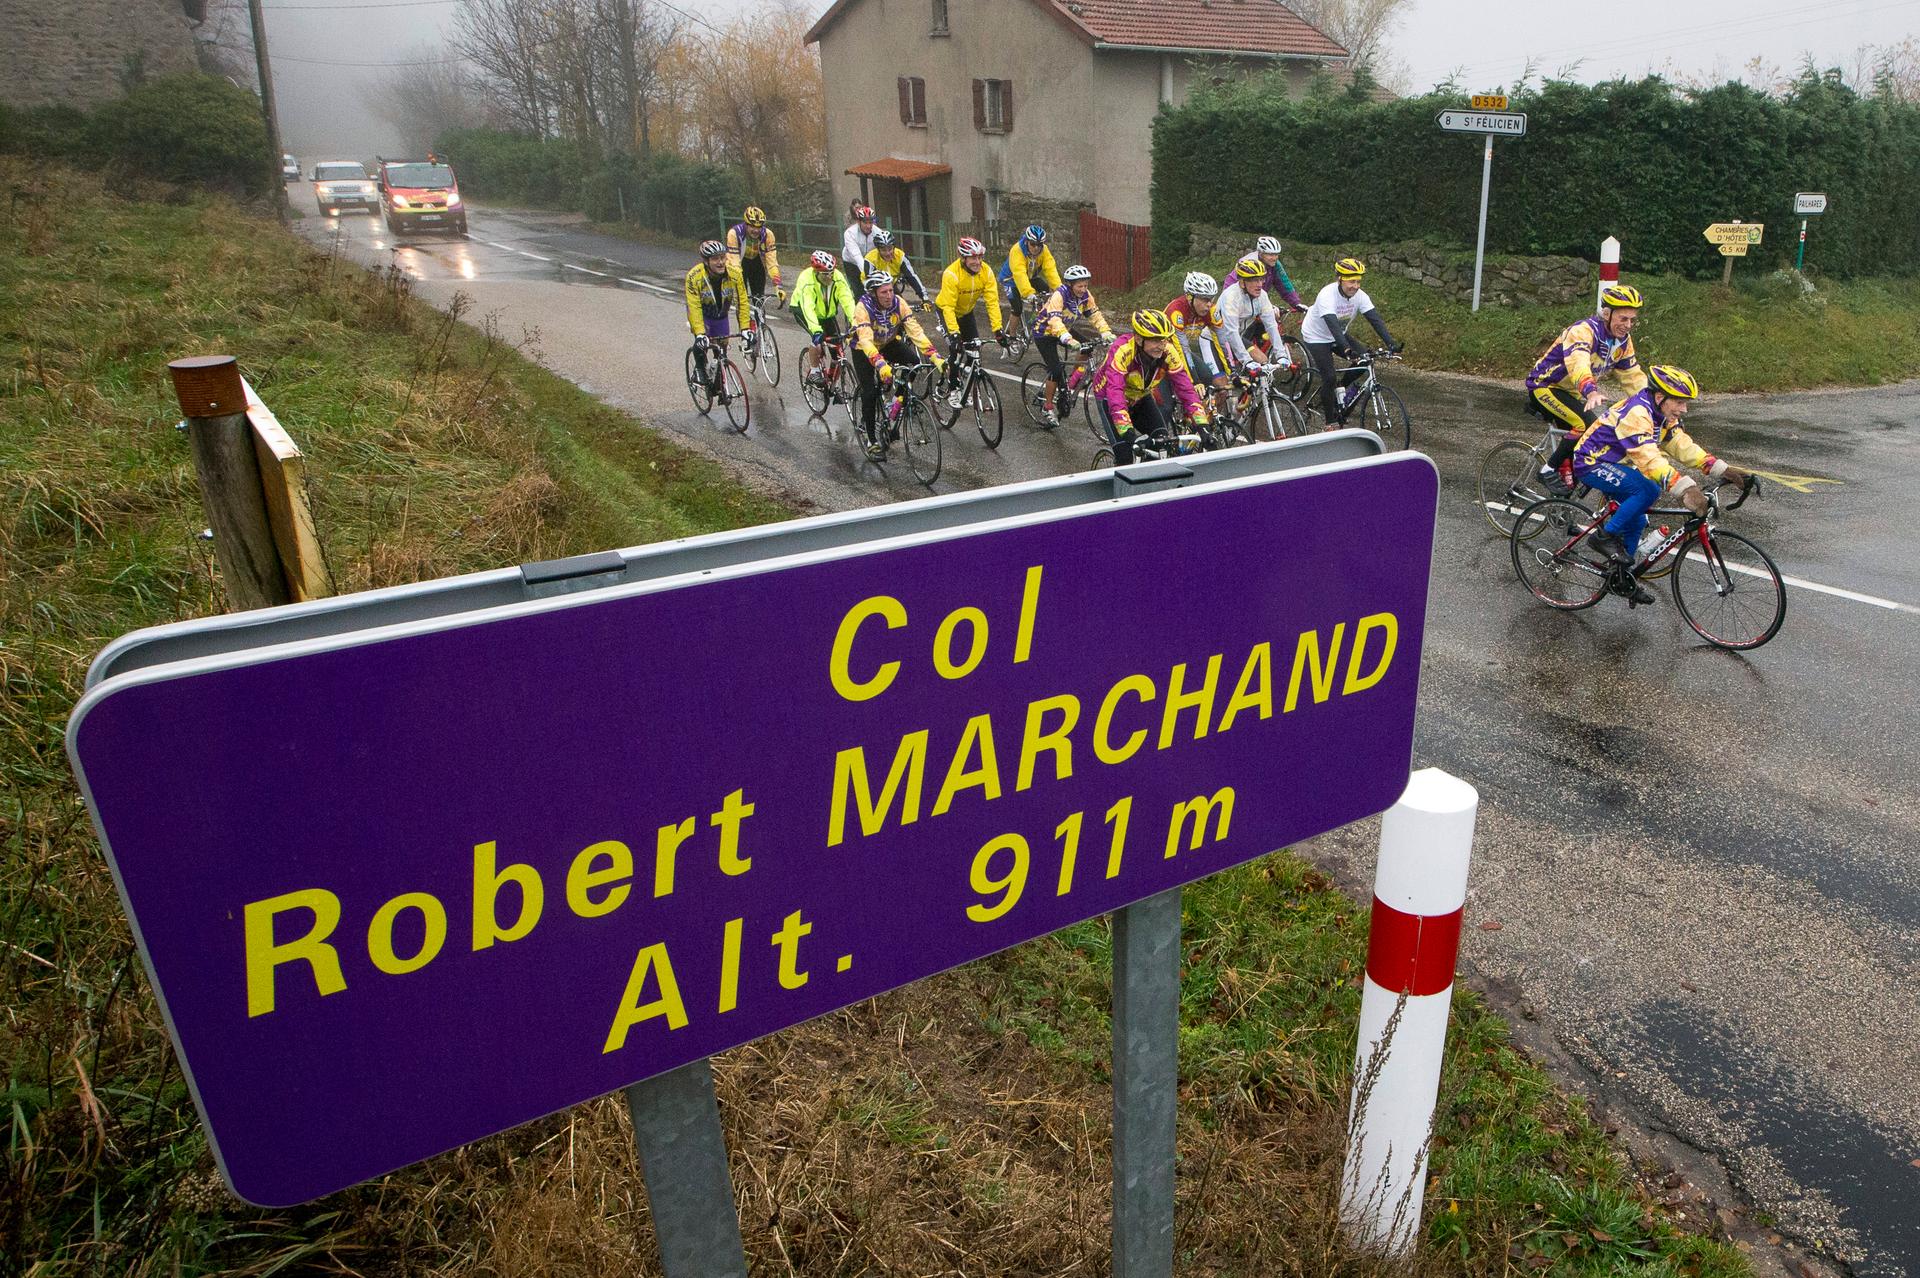 Robert Marchand (R), 103 years-old, cycles in the rain ahead of a small group of riders to celebrate his birthday as he makes his way along the Robert Marchand pass